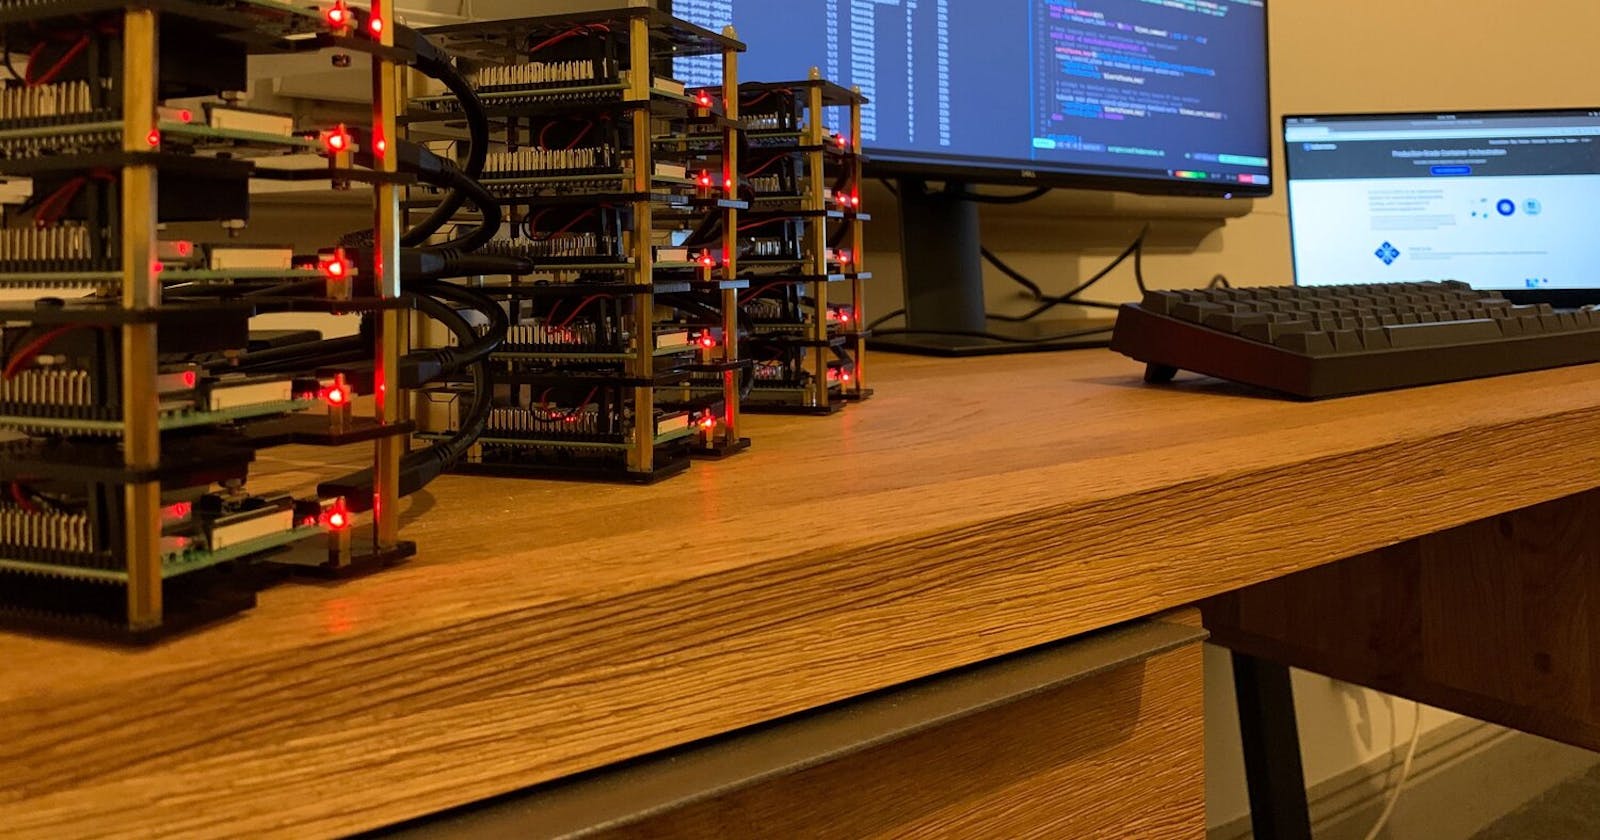 Step-By-Step Process To Deploy Kubernetes On Your Raspberry PIs!!